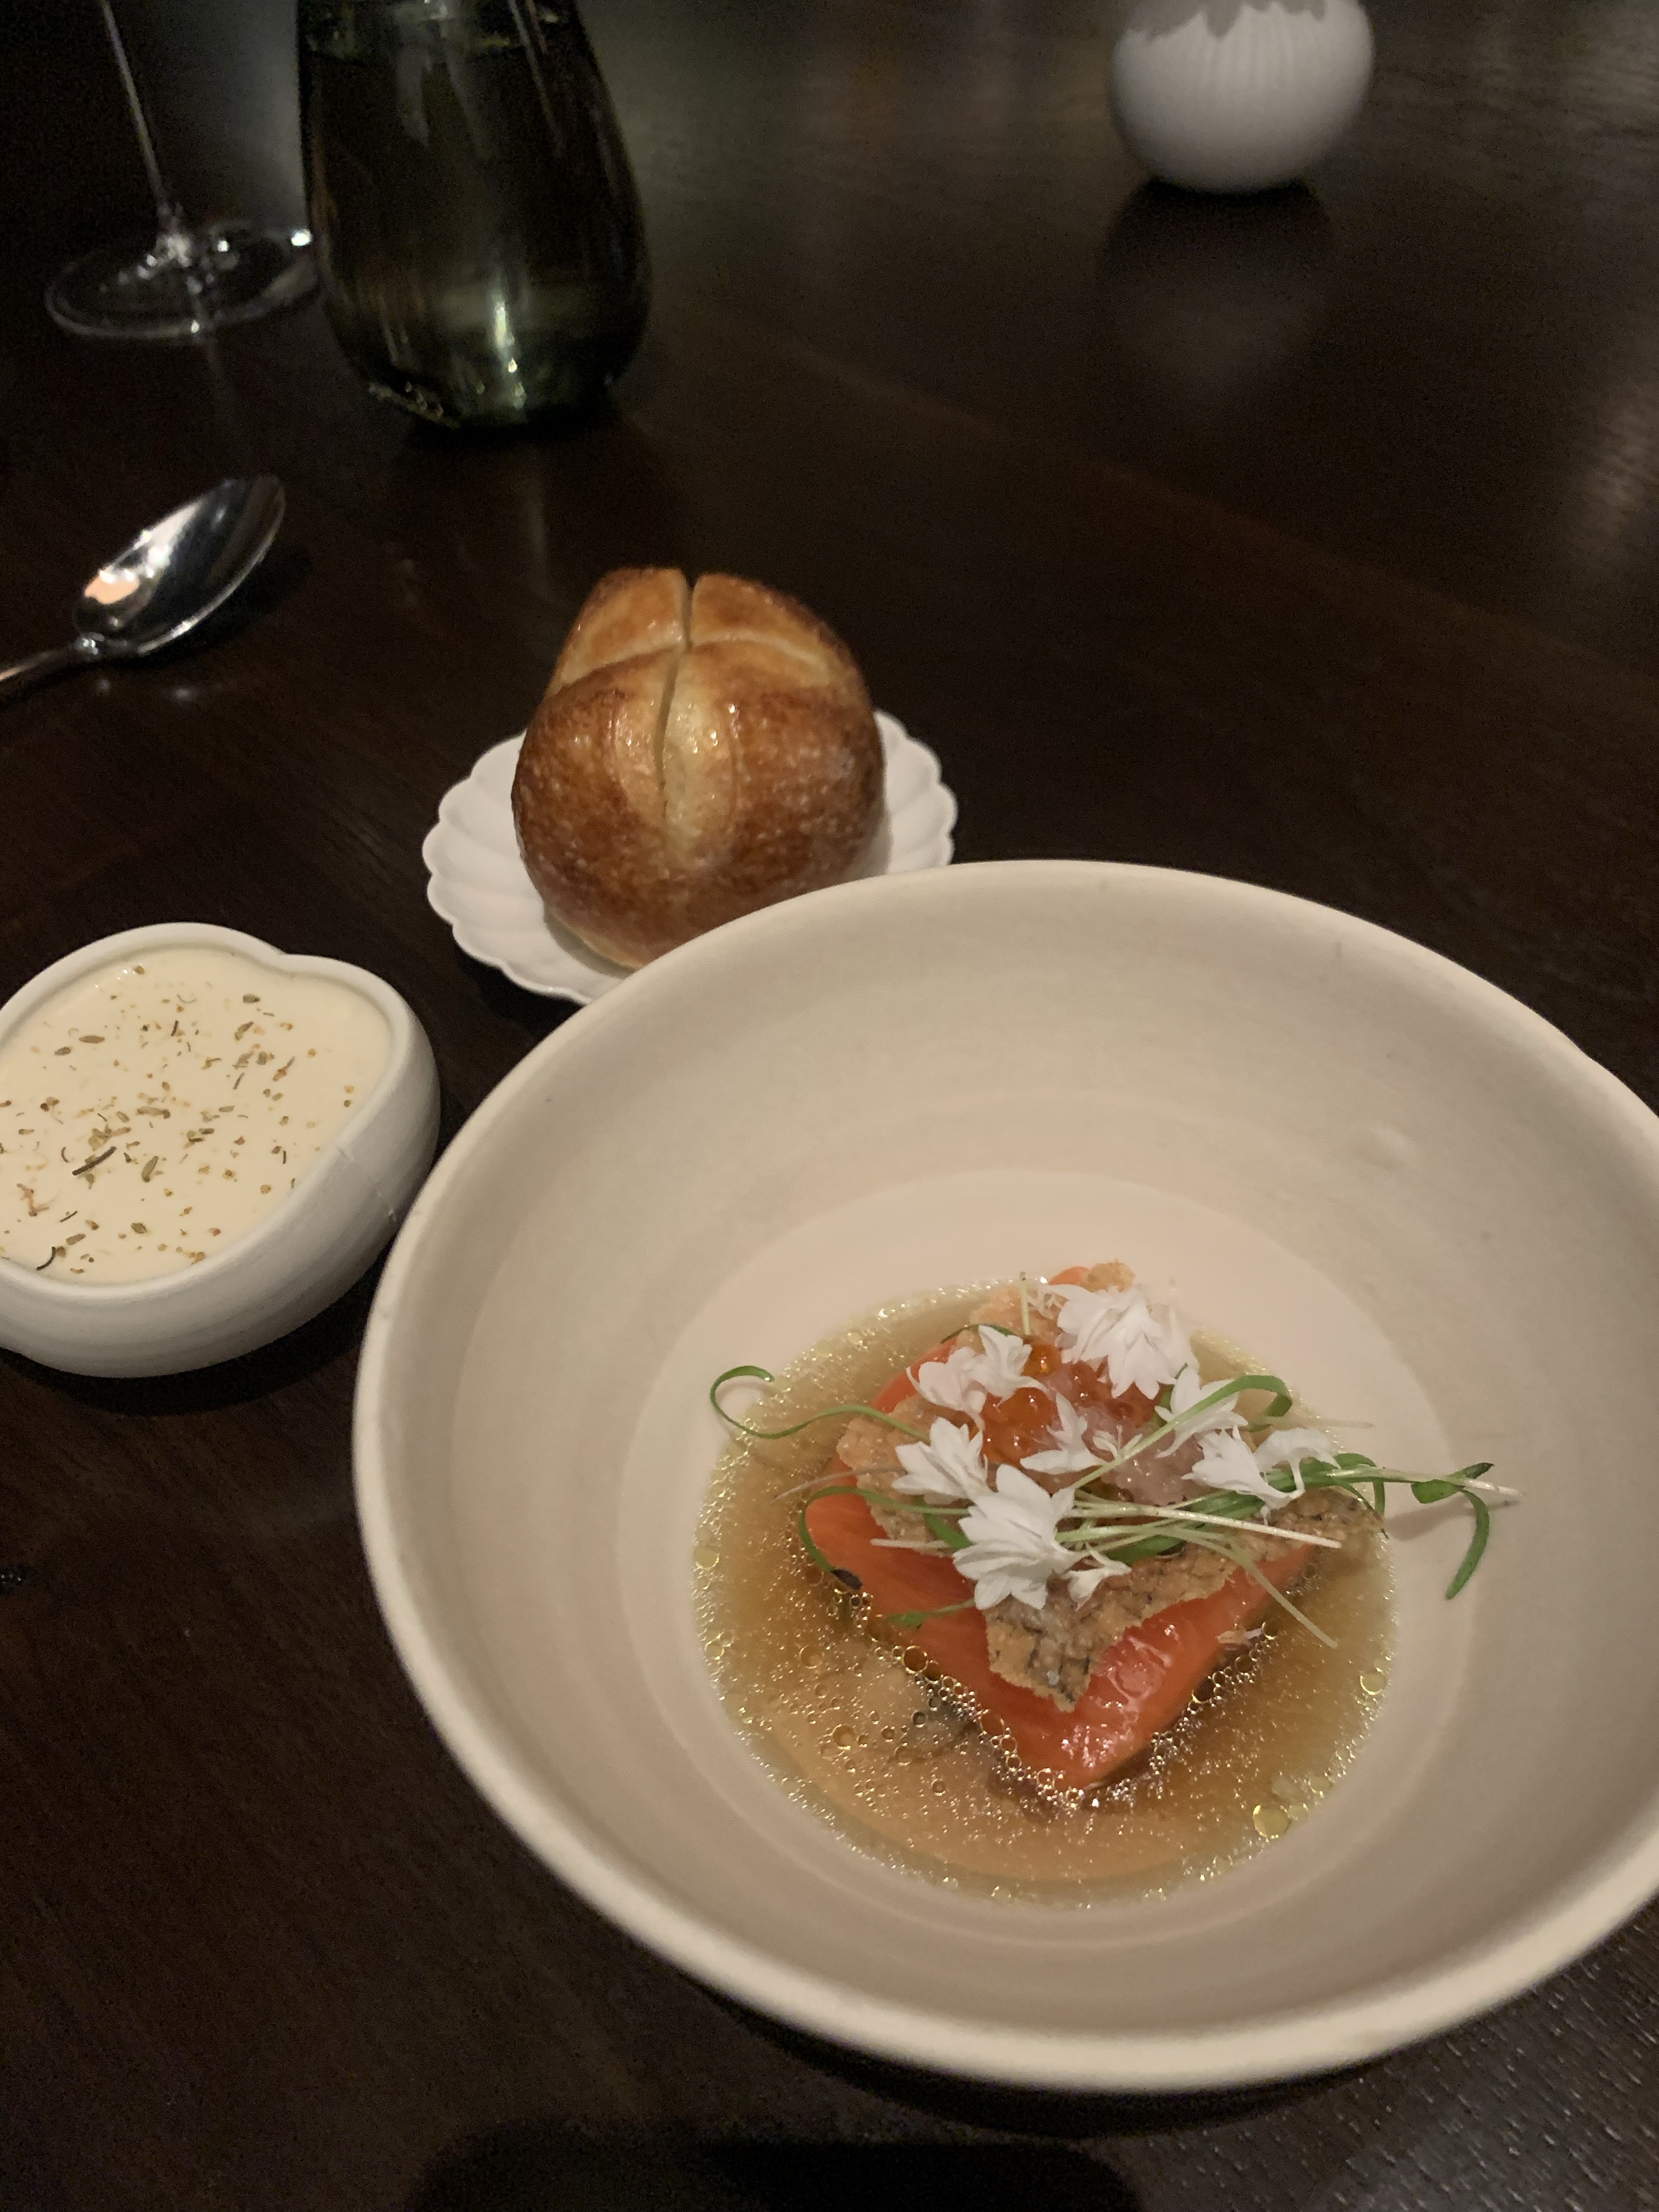 Dinner roll next to a bowl of with an orange trout fillet, broth, and skin puffed & placed on top of the filet